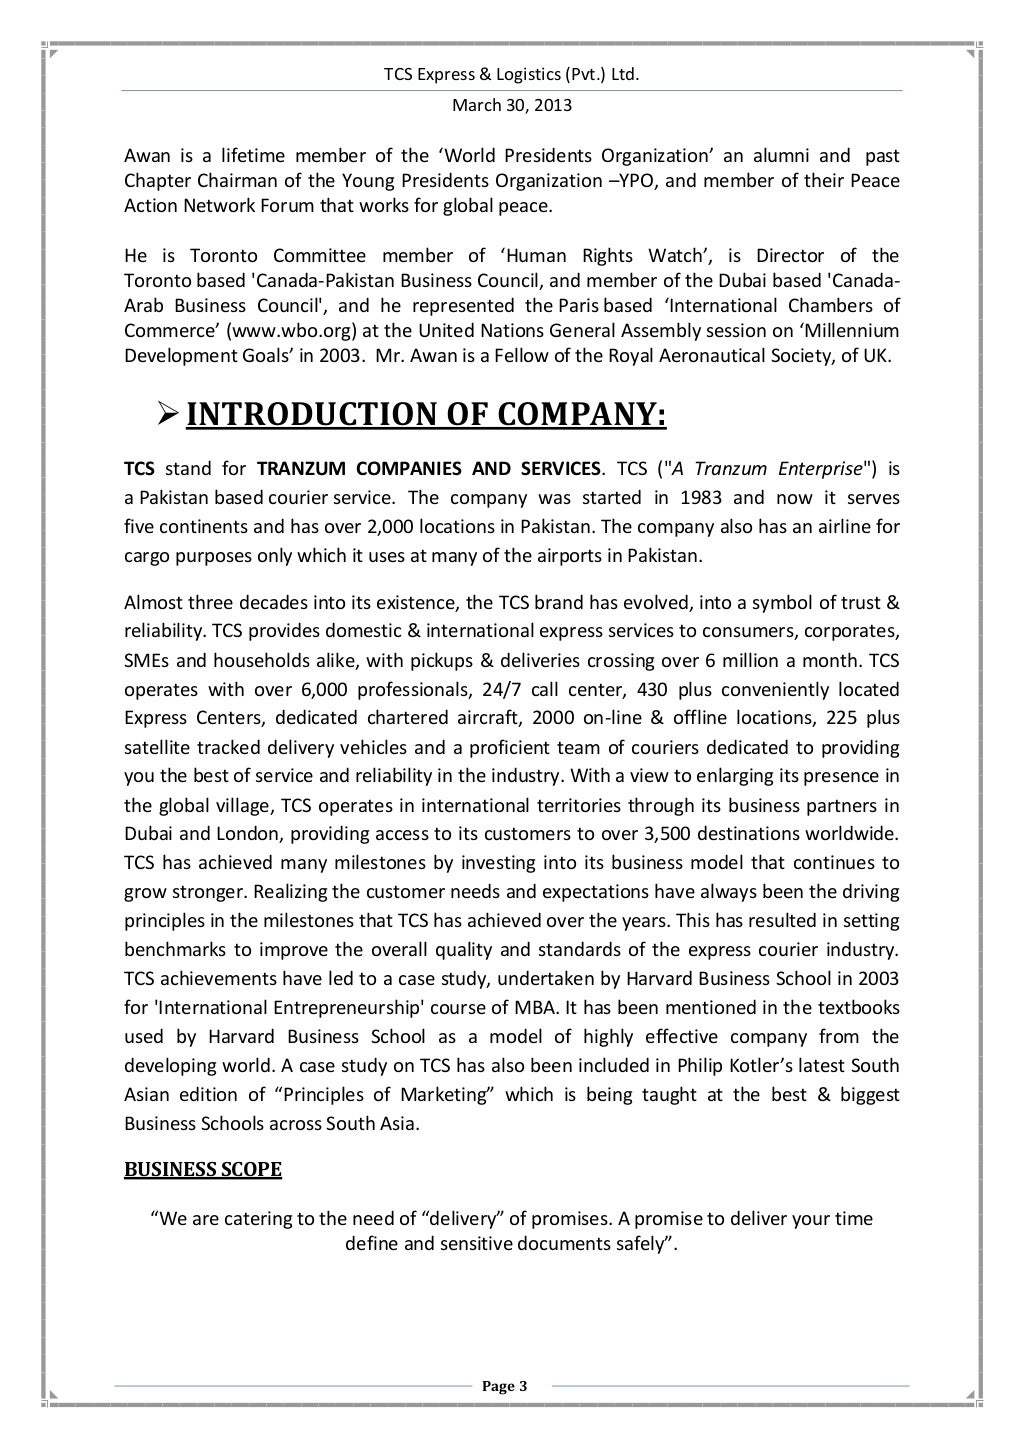 research report on tcs